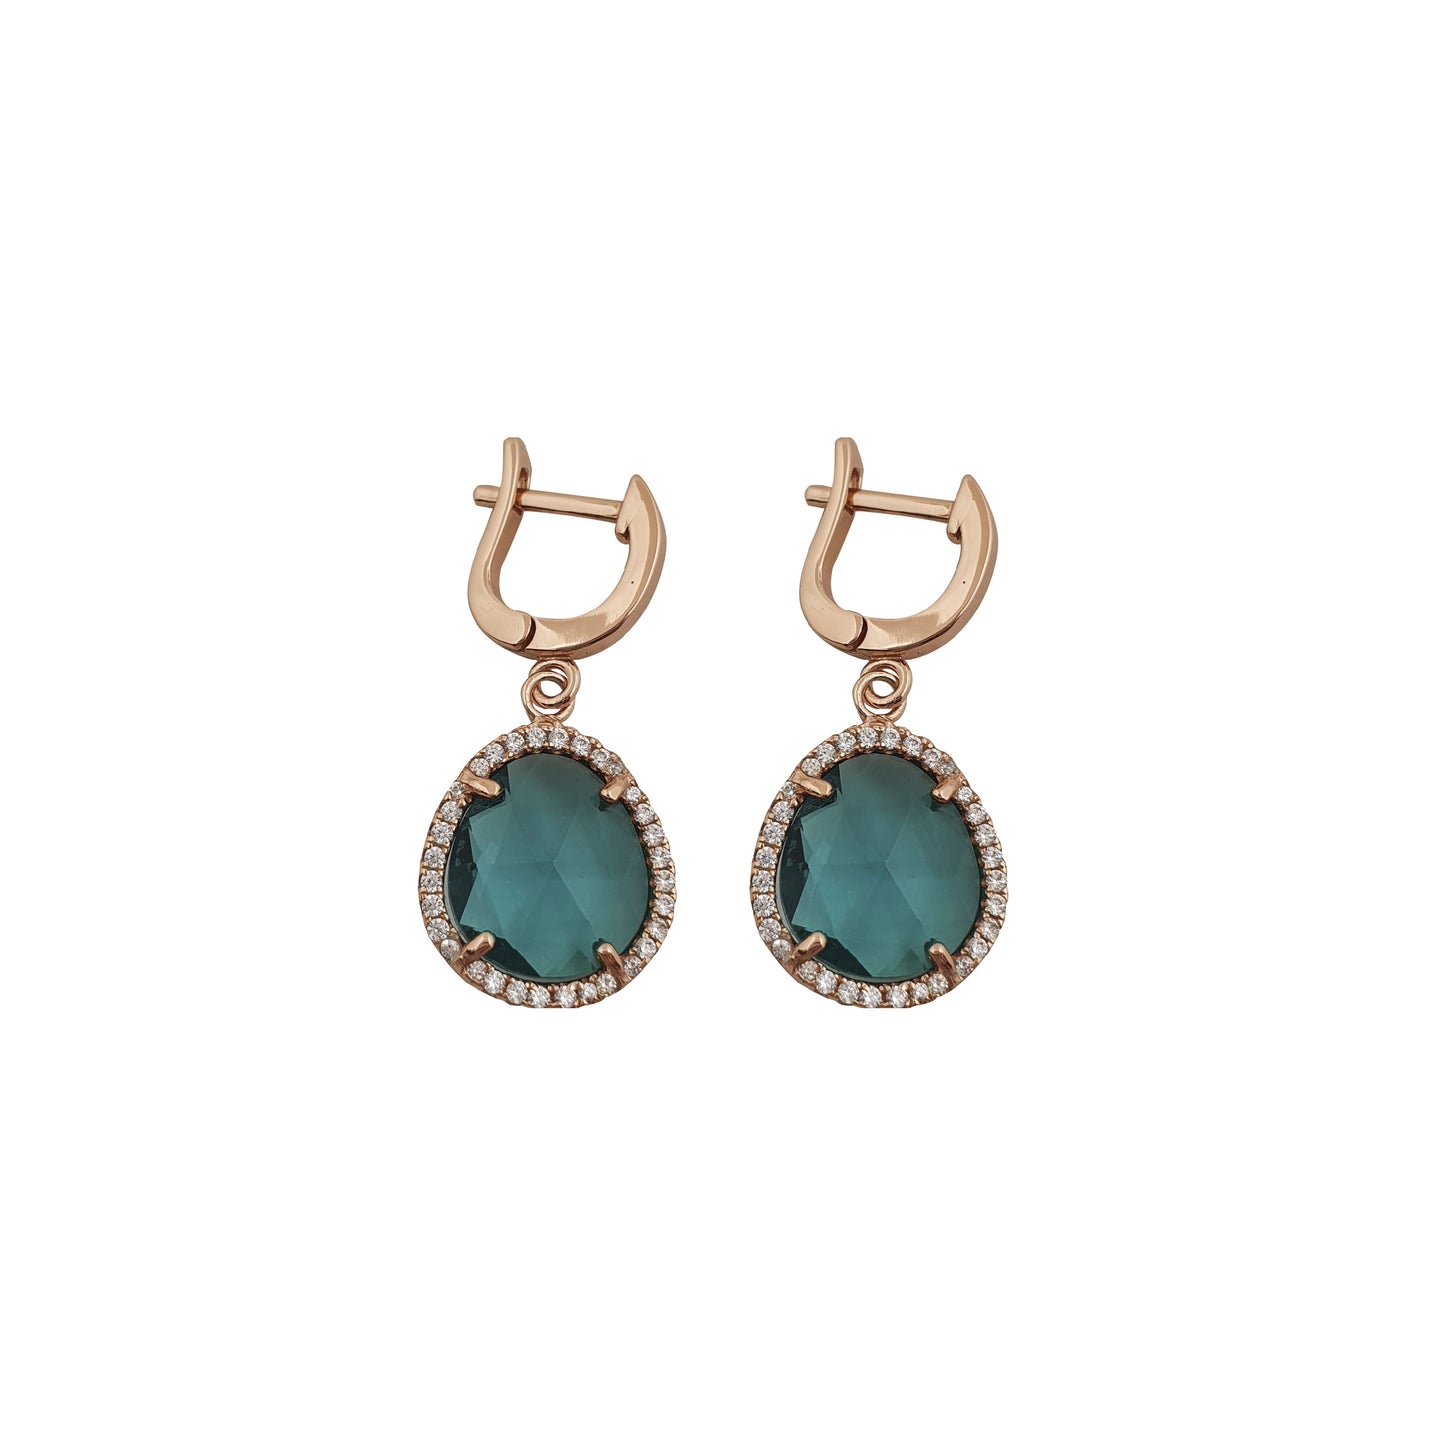 Tourmaline Pear Shaped Earrings in 18K Rose Gold Silver with White Zirconias - Nelissima Jewelry